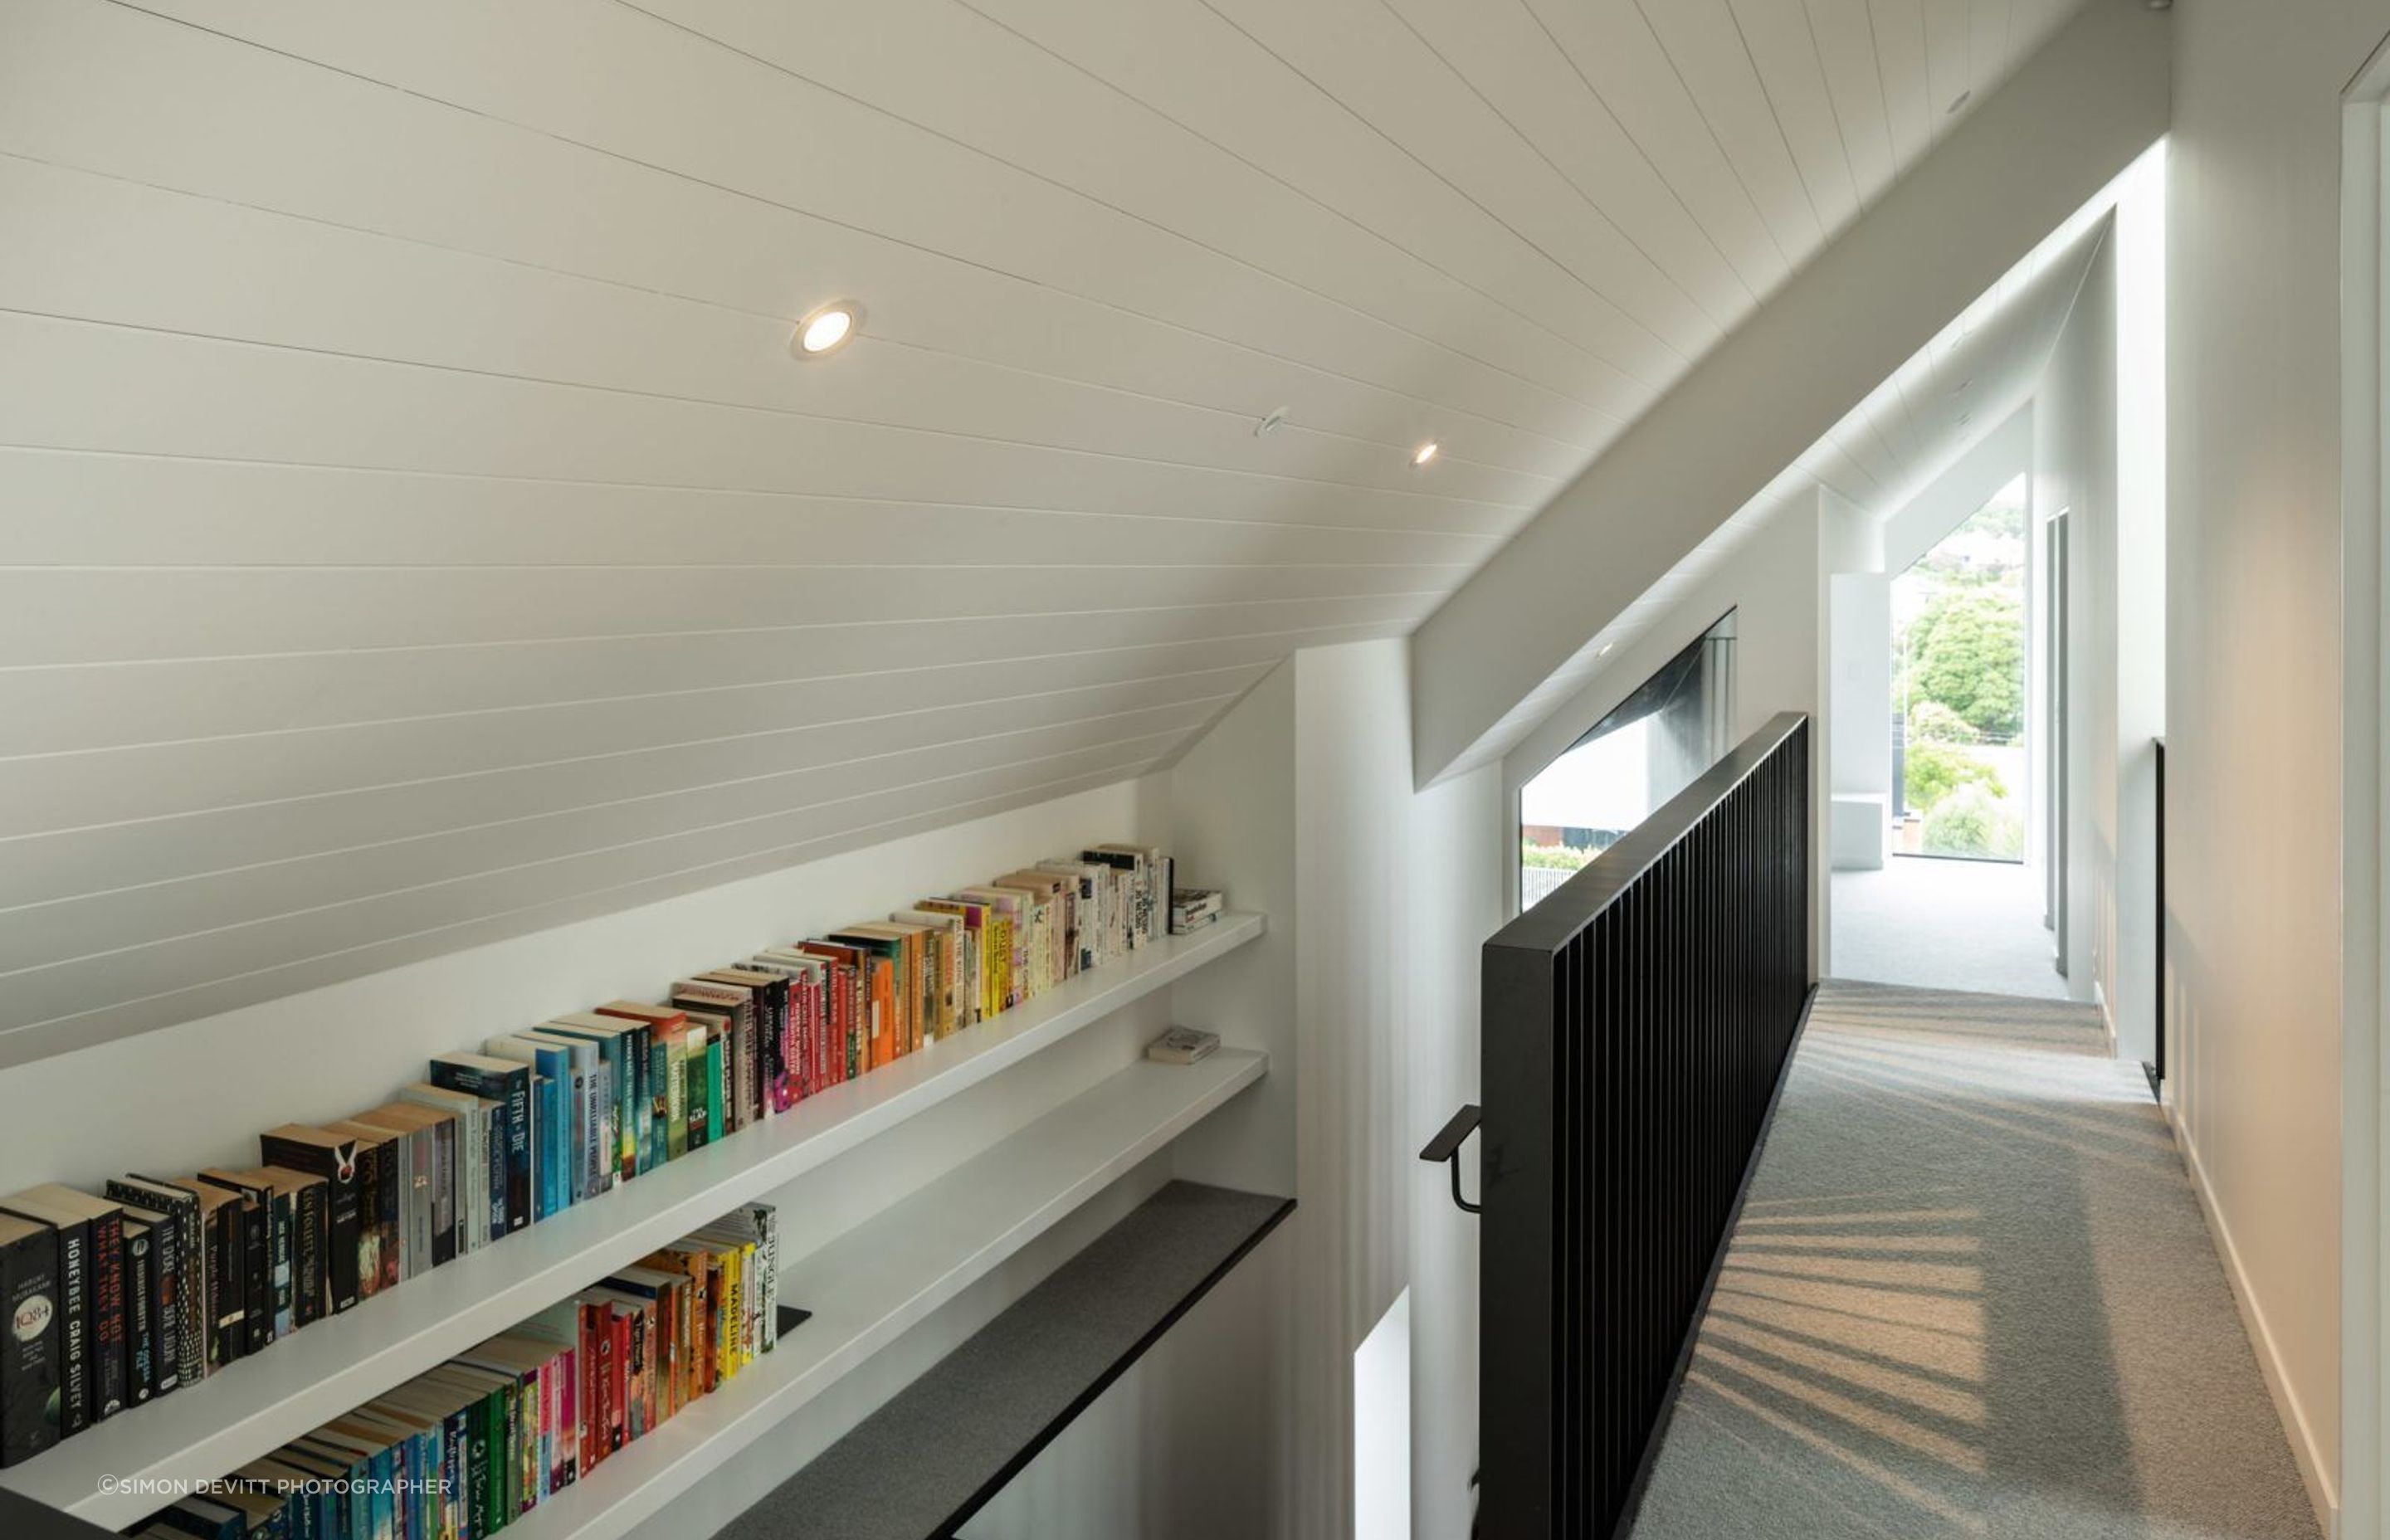 Upstairs space is maximised by tucking the hallway into the slant of the gabled roof.